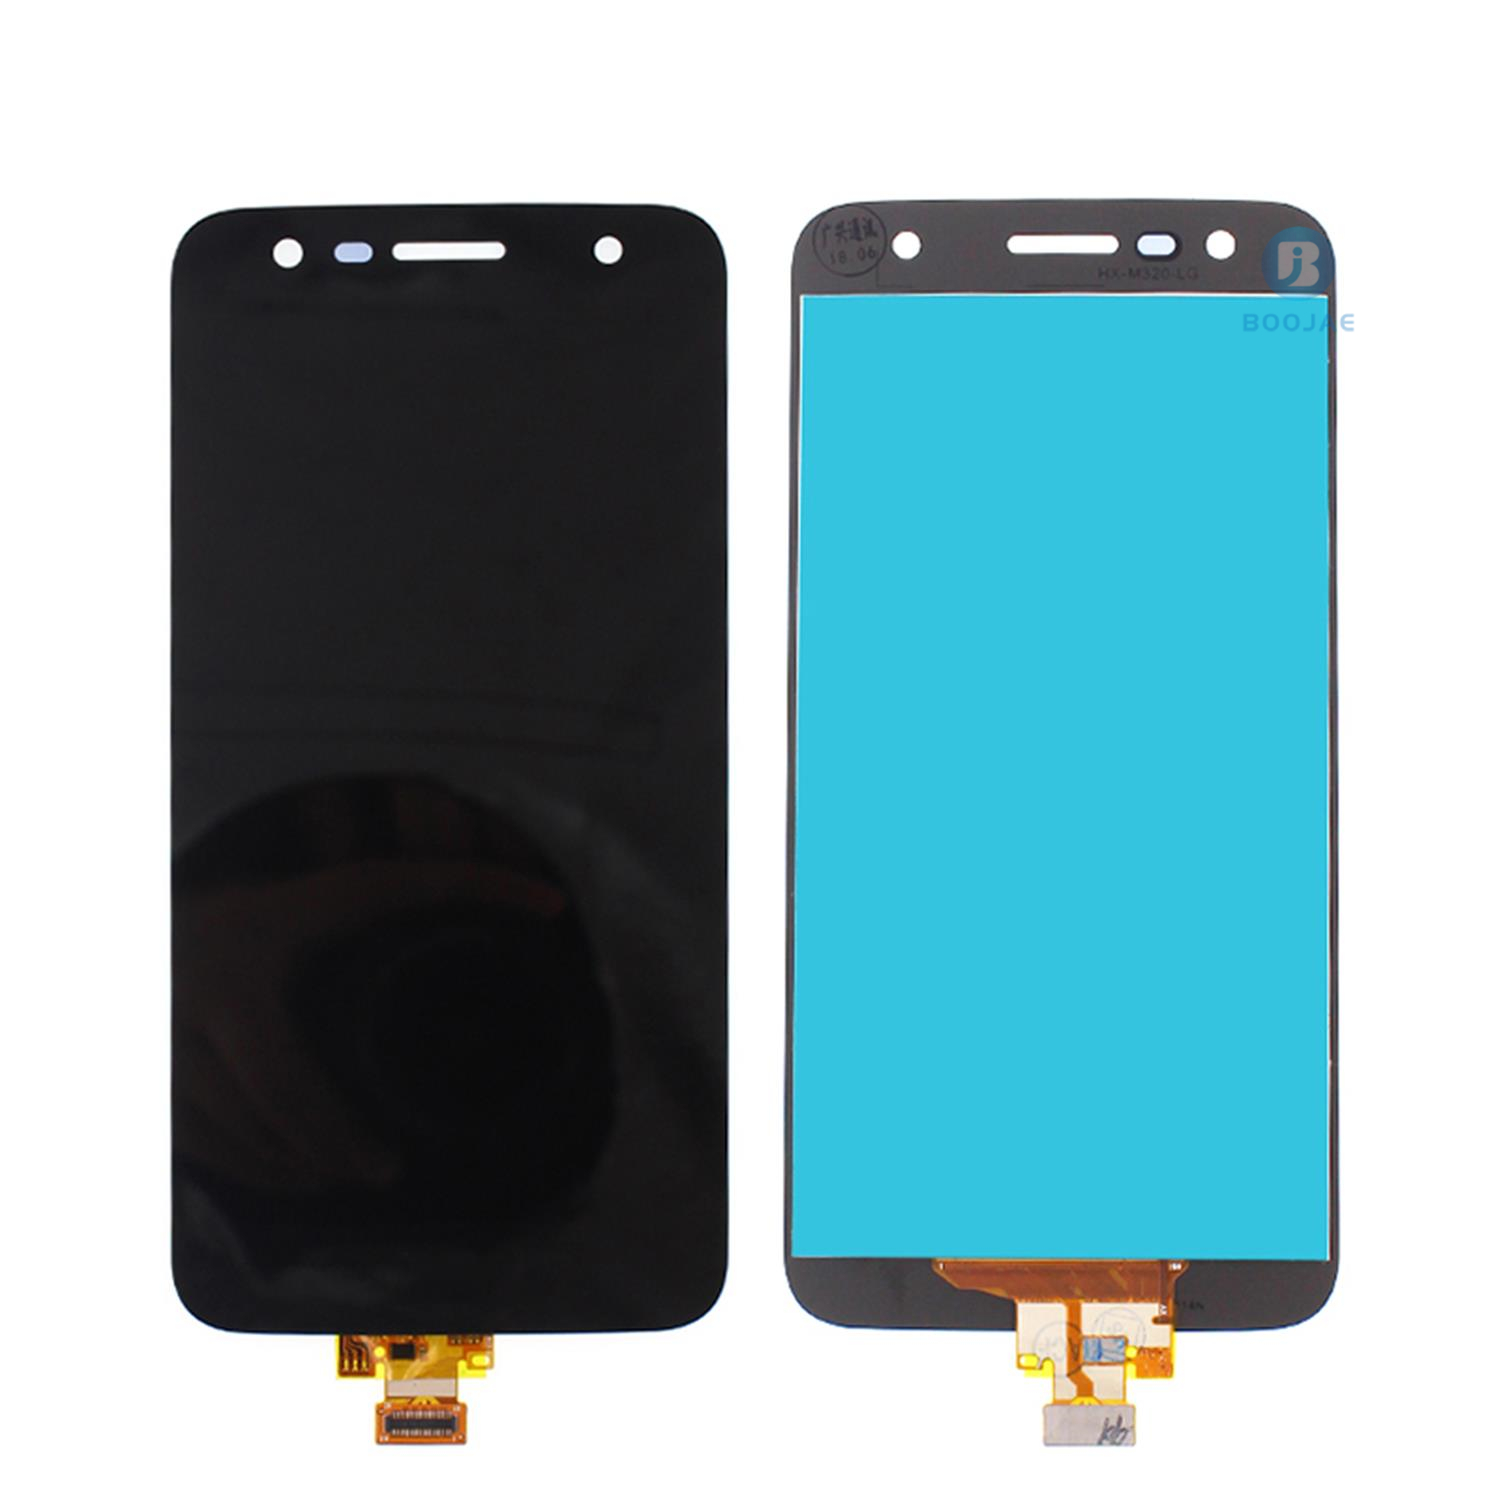 For LG X Power 2 LCD Screen Display and Touch Panel Digitizer Assembly Replacement